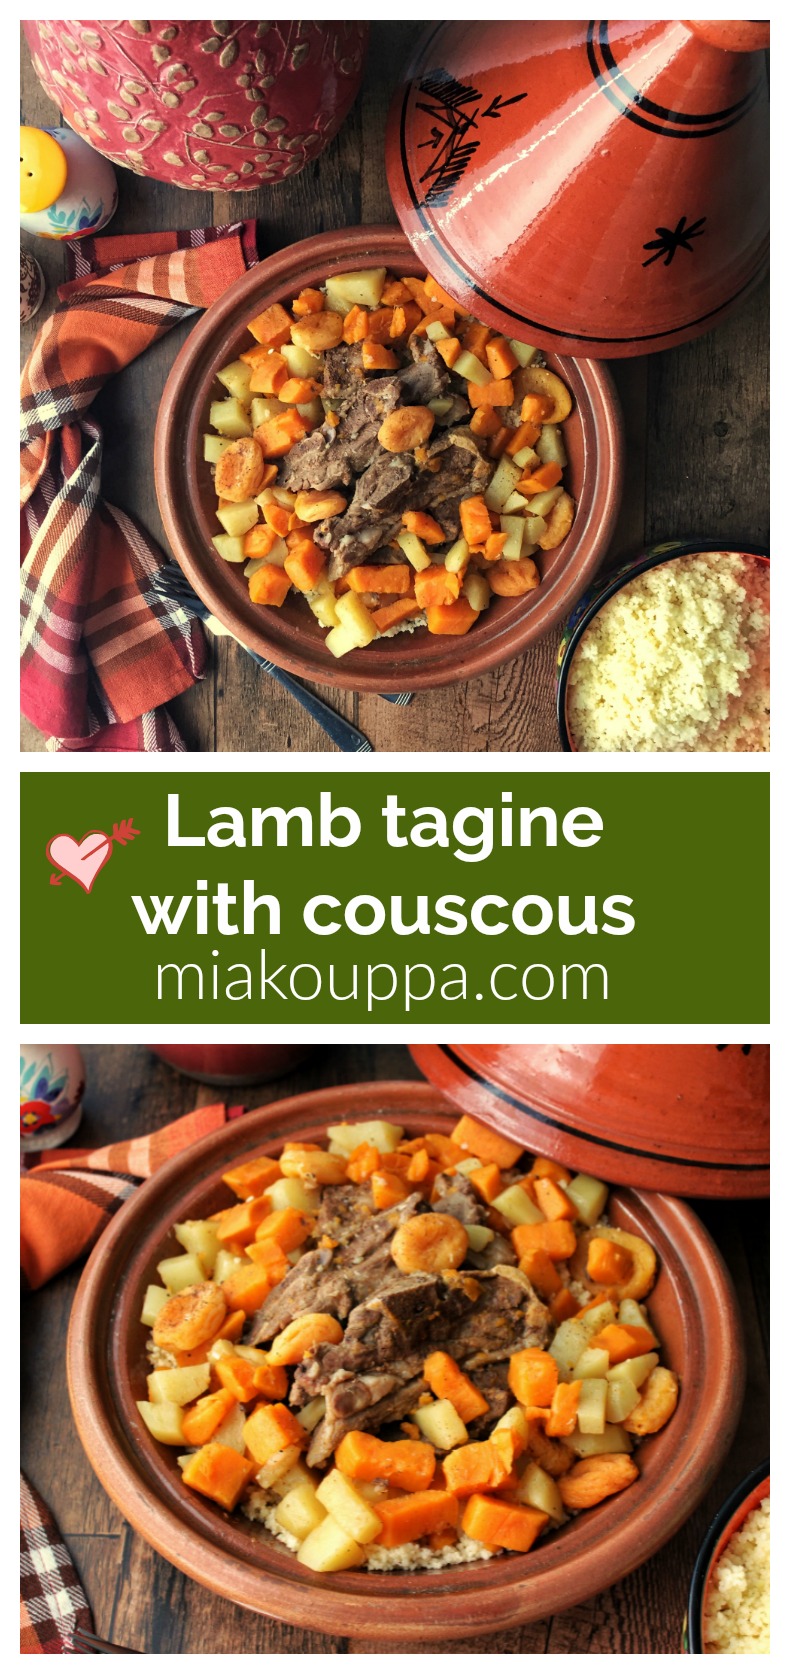 Lamb tagine with couscous